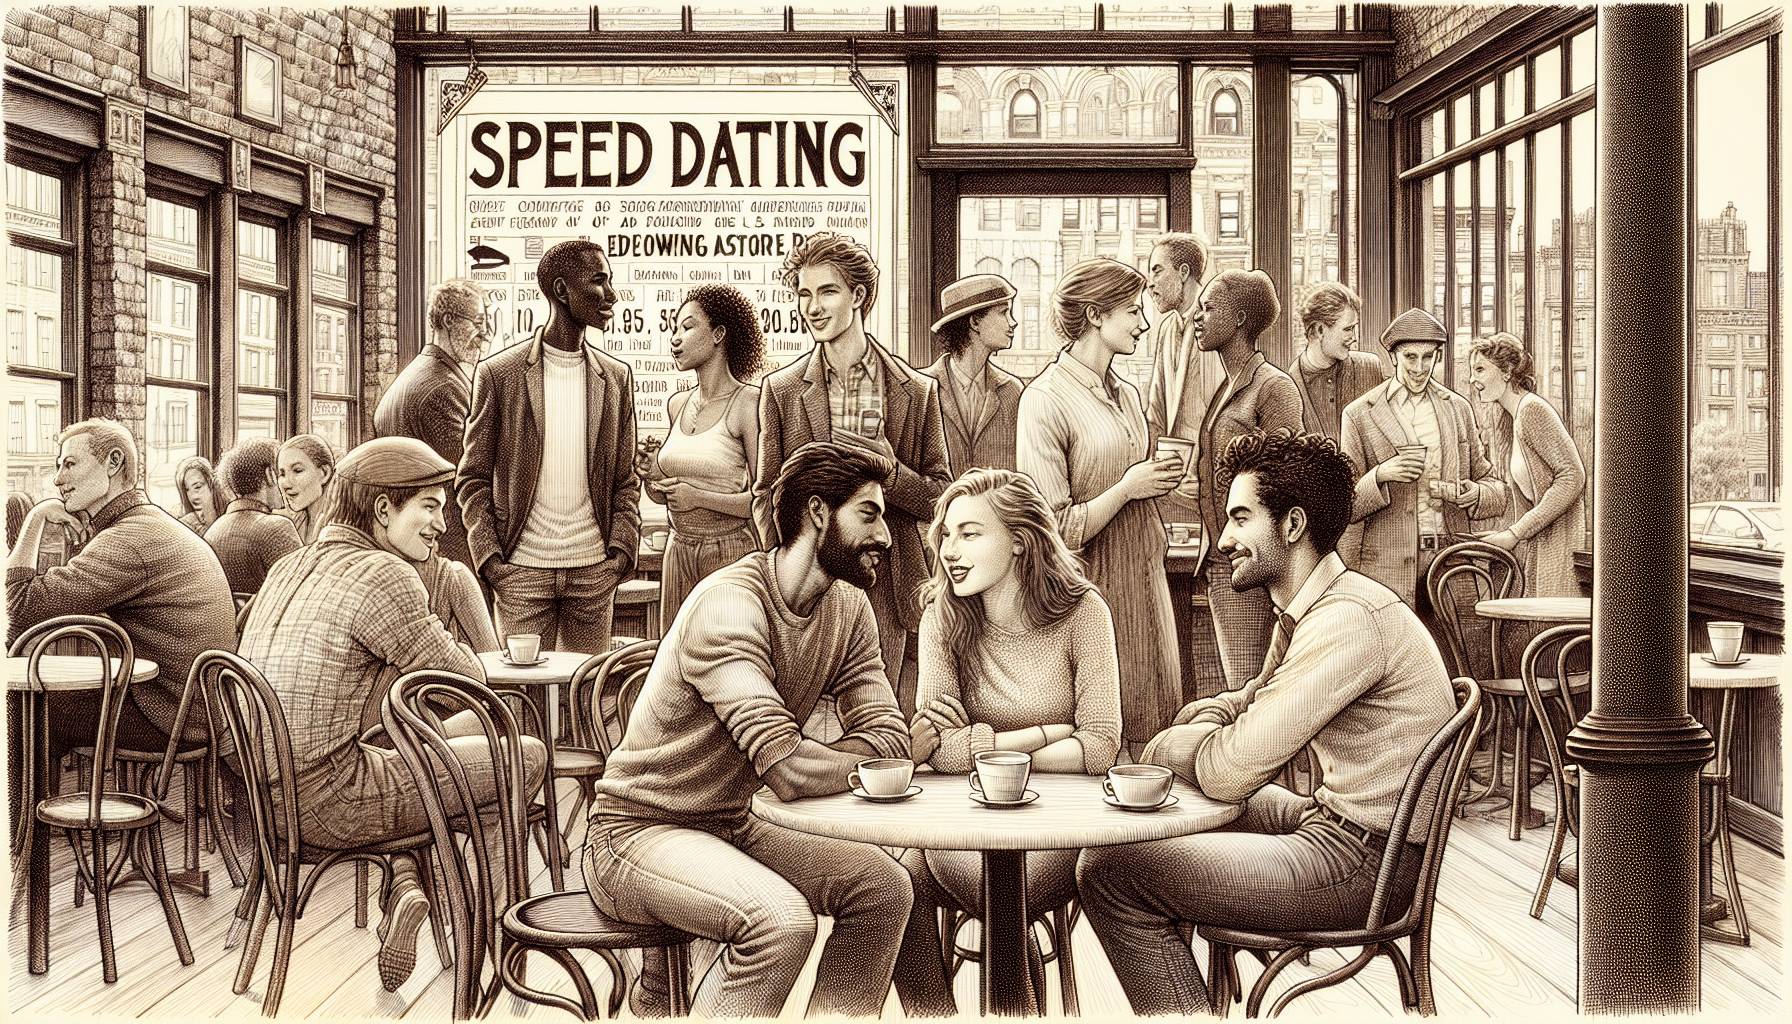 "Speed Dating Shift"